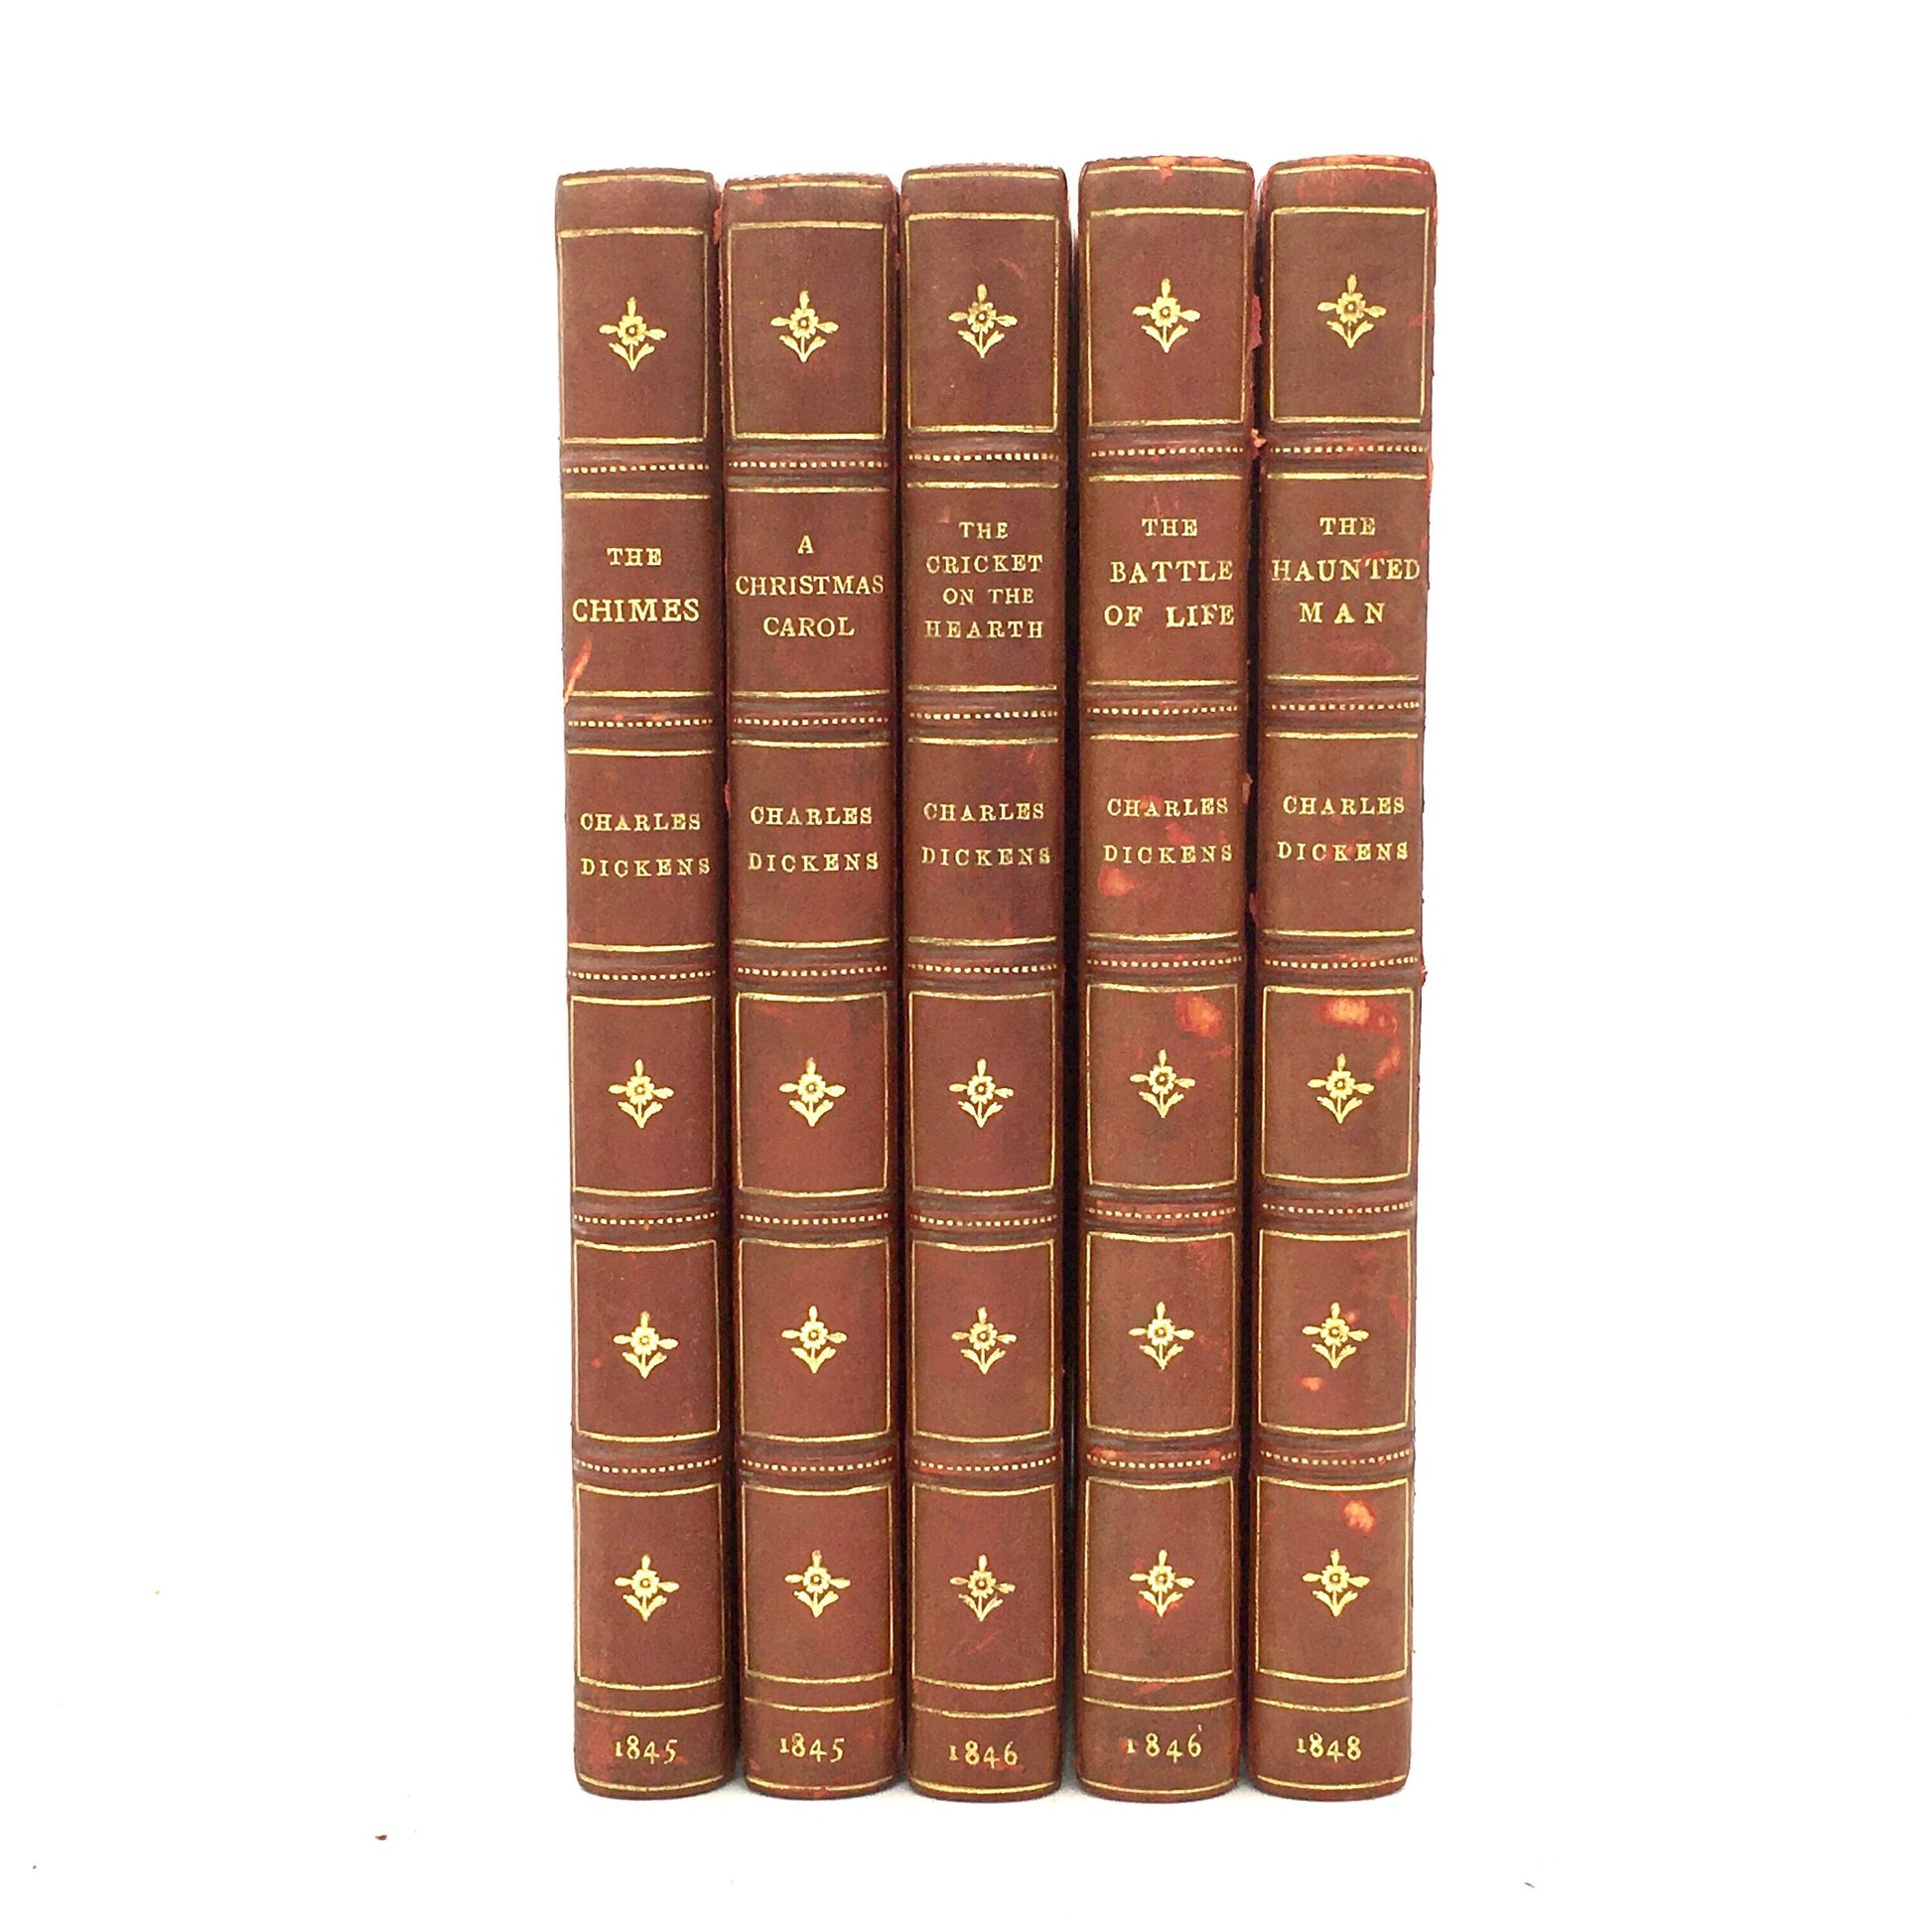 DICKENS, Charles. Complete Set of "Christmas Books" - 5 Volumes, 1845-1848 - Buzz Bookstore